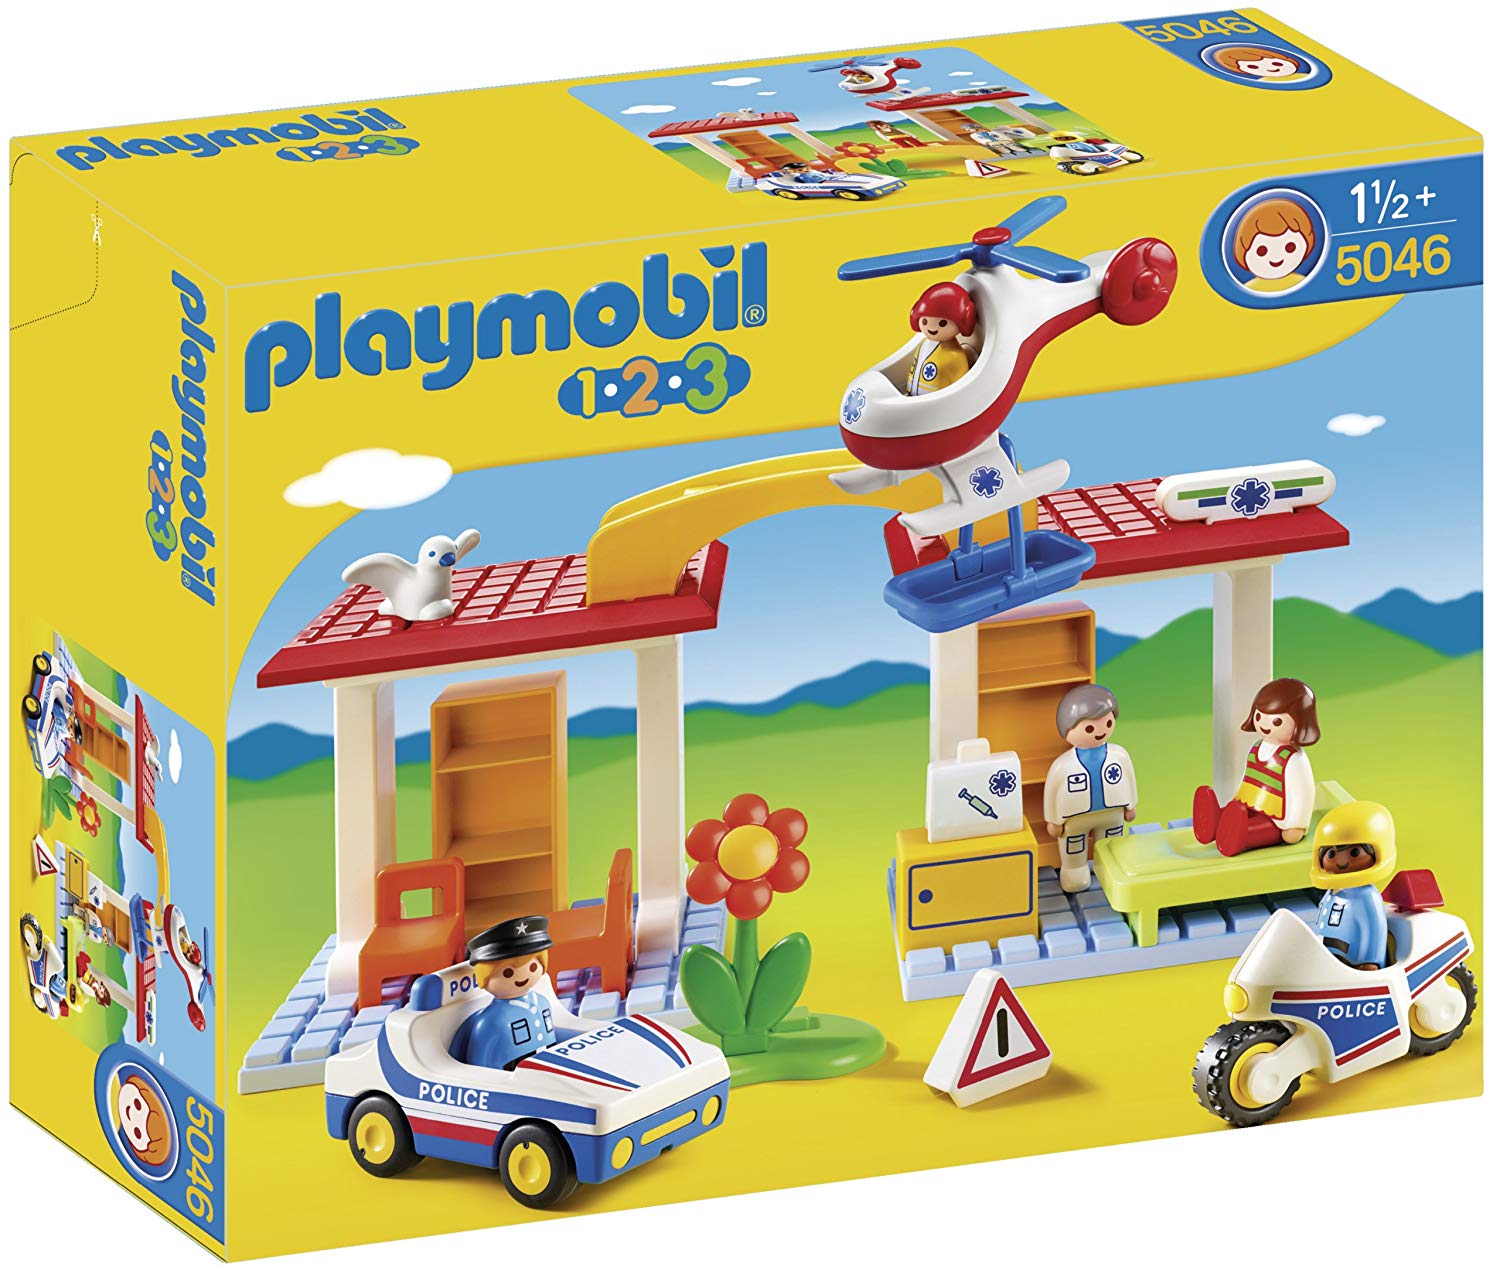 Playmobil Play Set Hospital With Paramedics And Police Officers